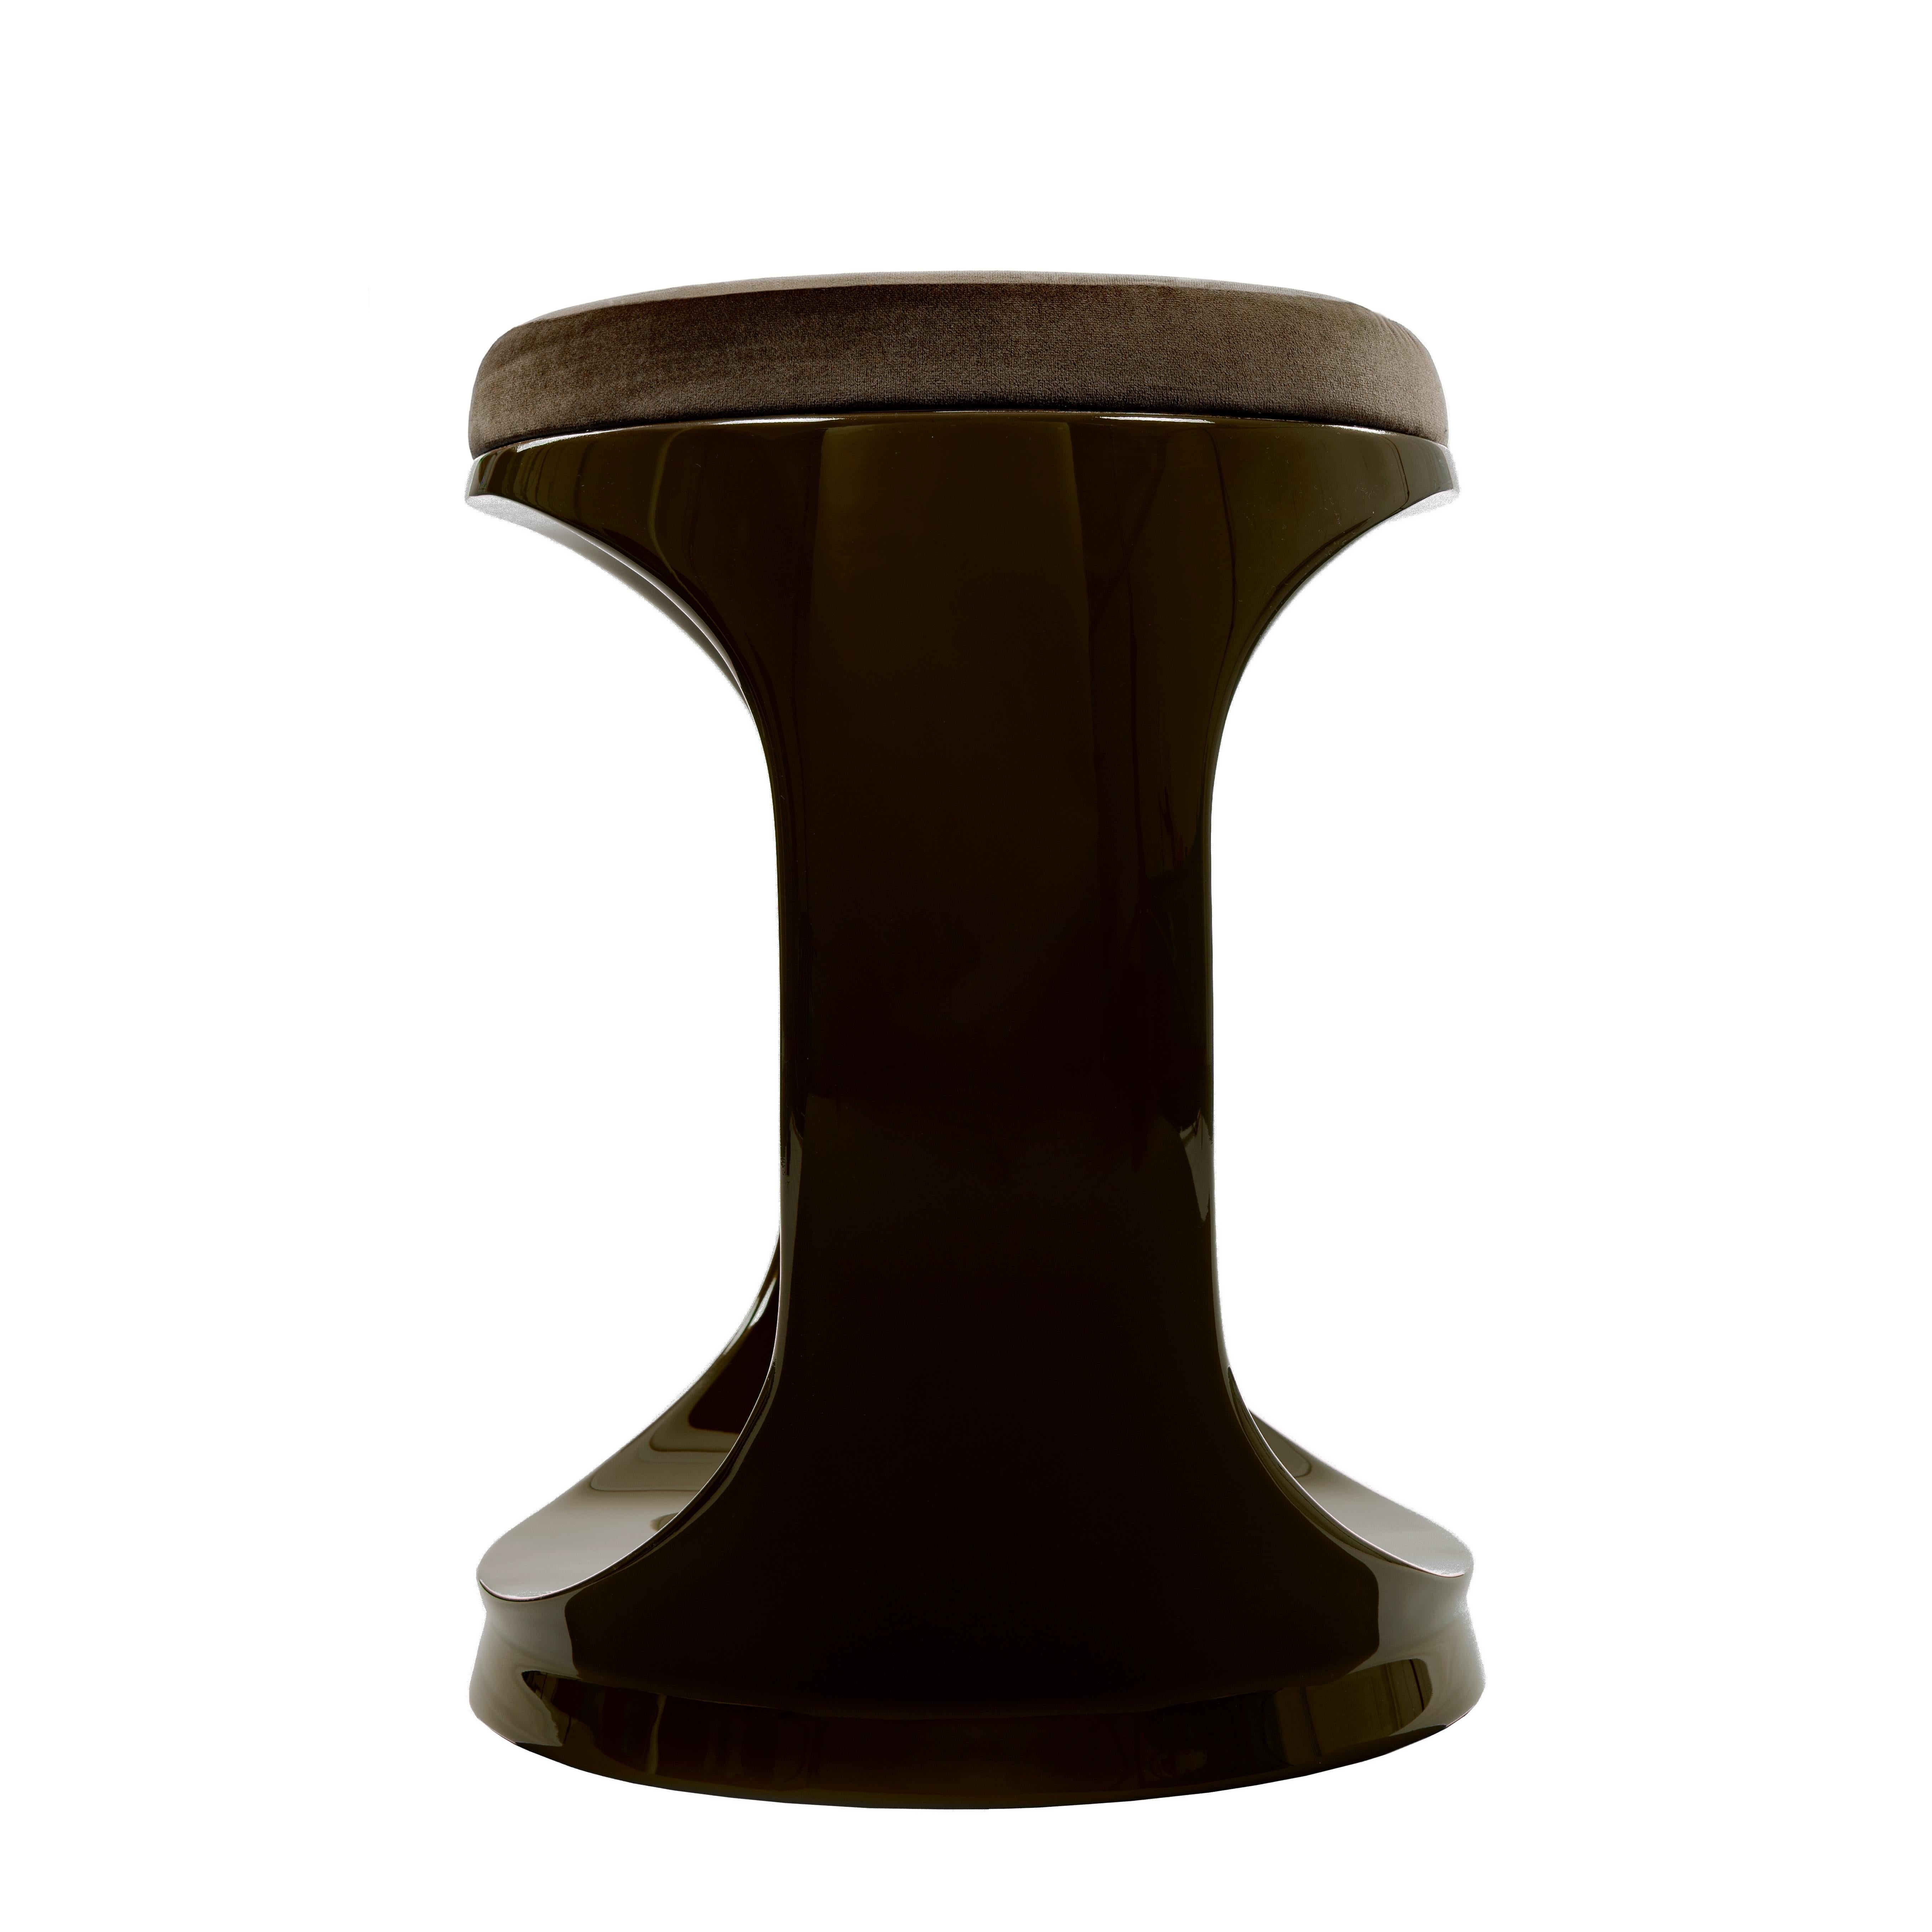 Contemporary Pouf by Cyril Rumpler Signet Ring, Hocker, Stool, brown.
These stools are available in a dozen colors and in a glossy finish. The black, white, navy blue, pink, red, turquoise, lilac, brown, green, and grey stools are available with a